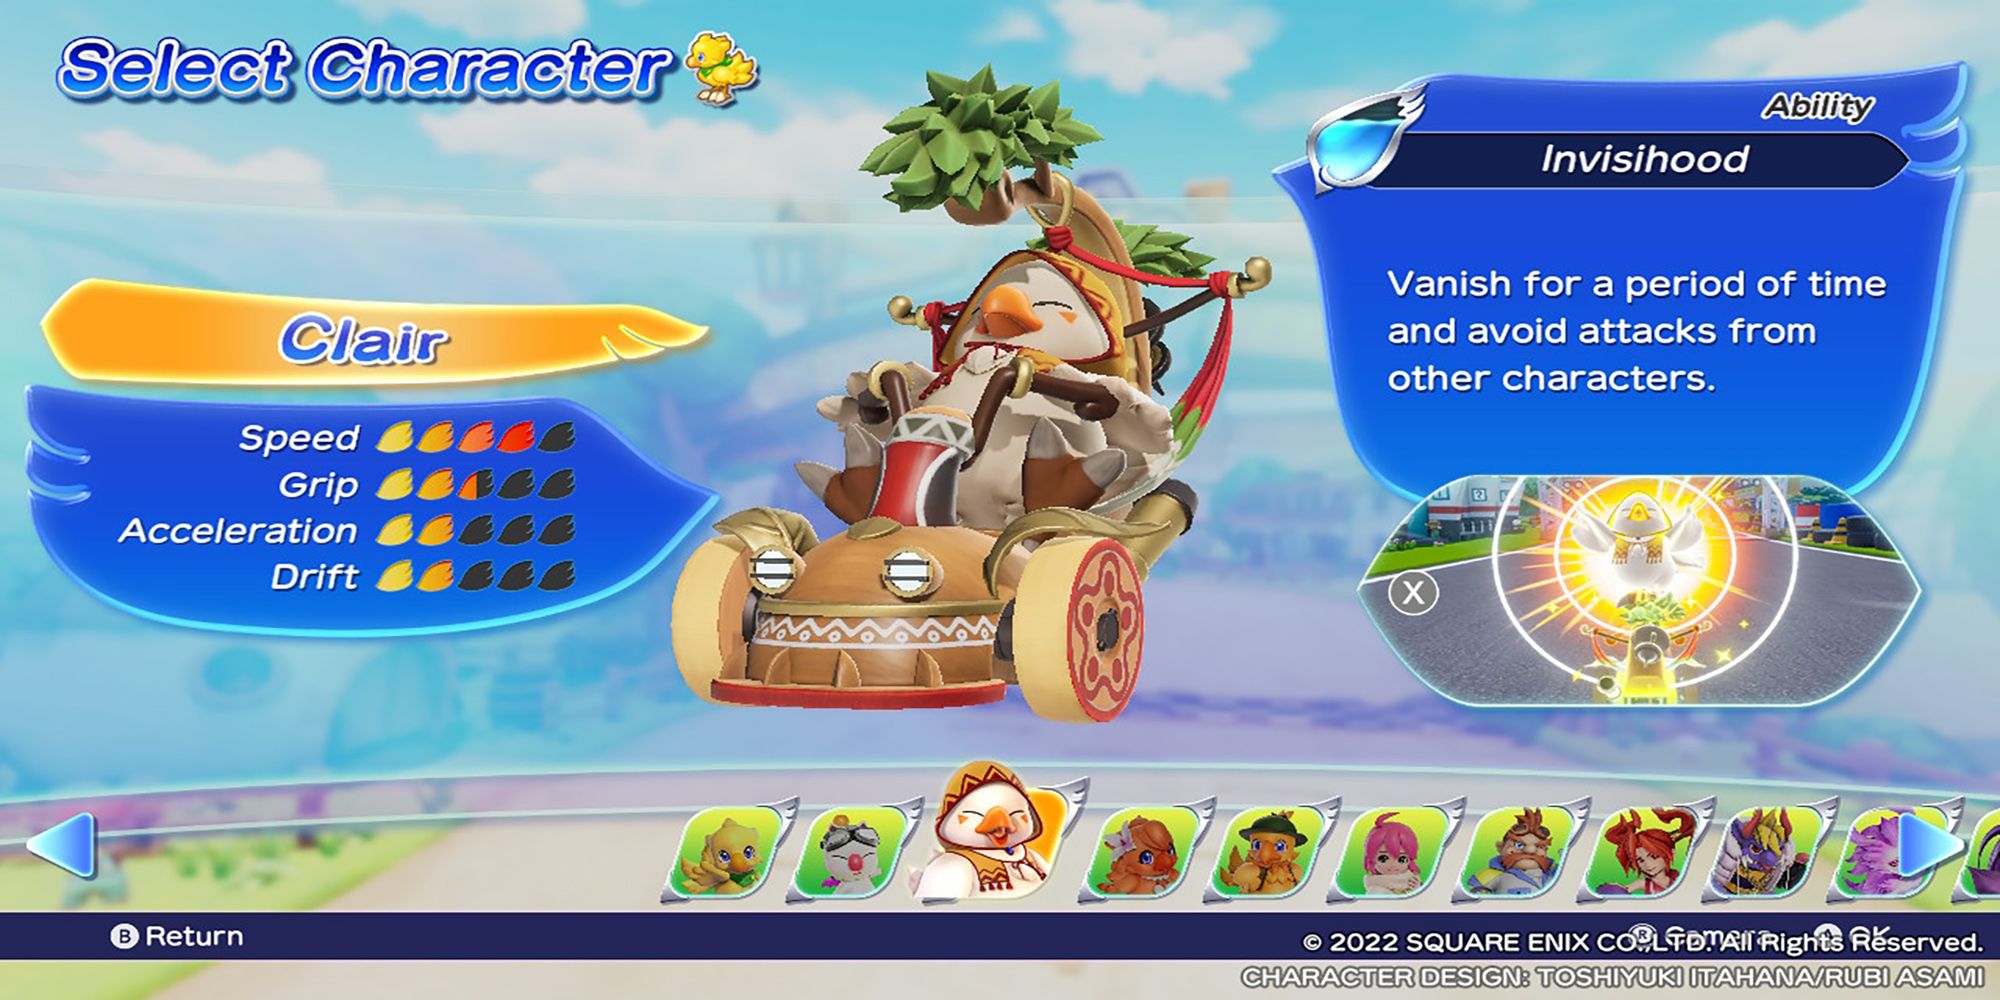 Clair's character model, along with his stats and abilities, in the Select Character menu. Chocobo GP.